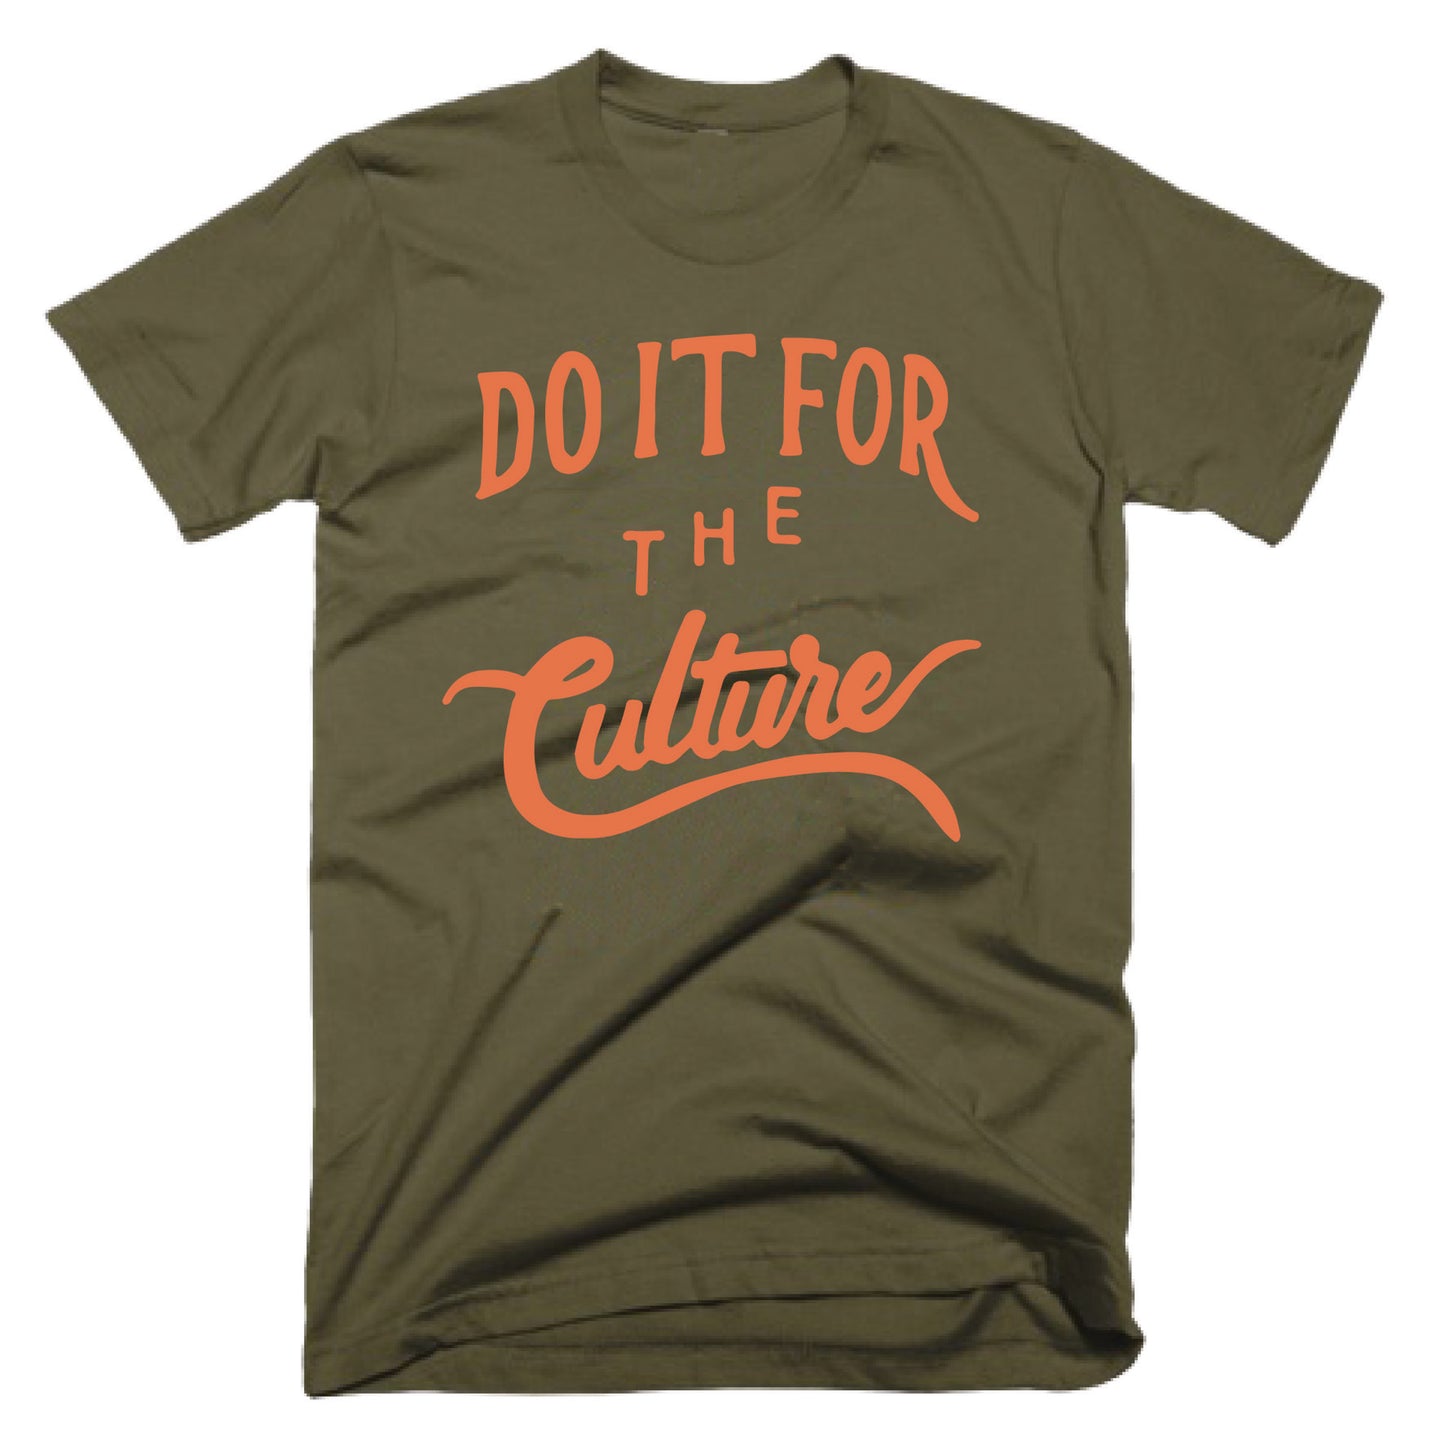 DO IT FOR THE CULTURE - LIGHT OLIVE TEE